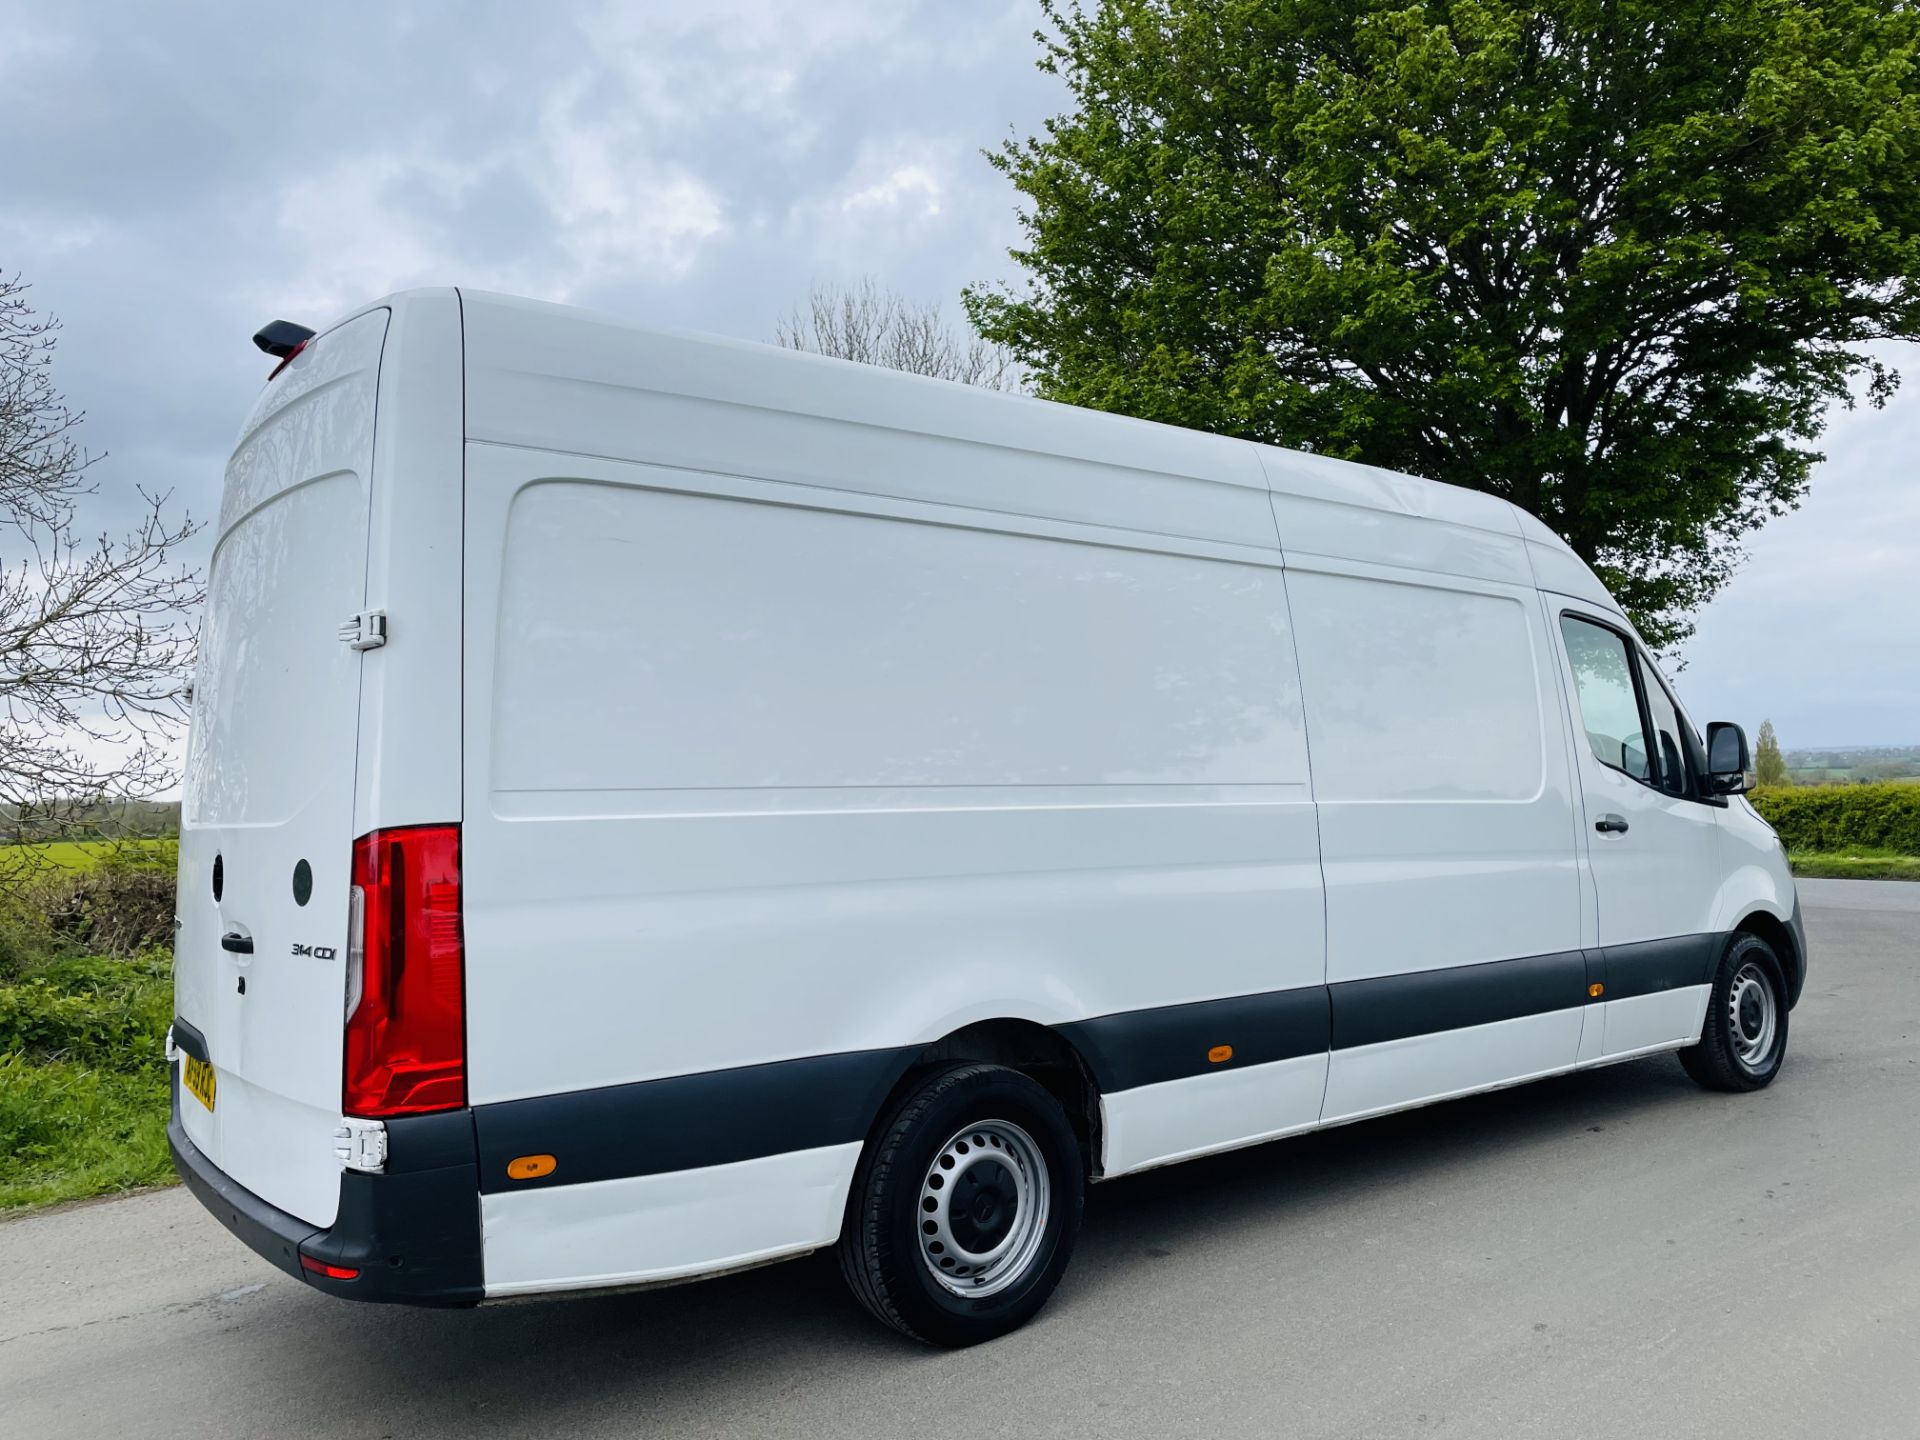 (ON SALE) MERCEDES SPRINTER 314CDI "LWB" HIGH ROOF (19 REG) EURO 6 - ONLY 83K MILES - CRUISE CONTROL - Image 3 of 17